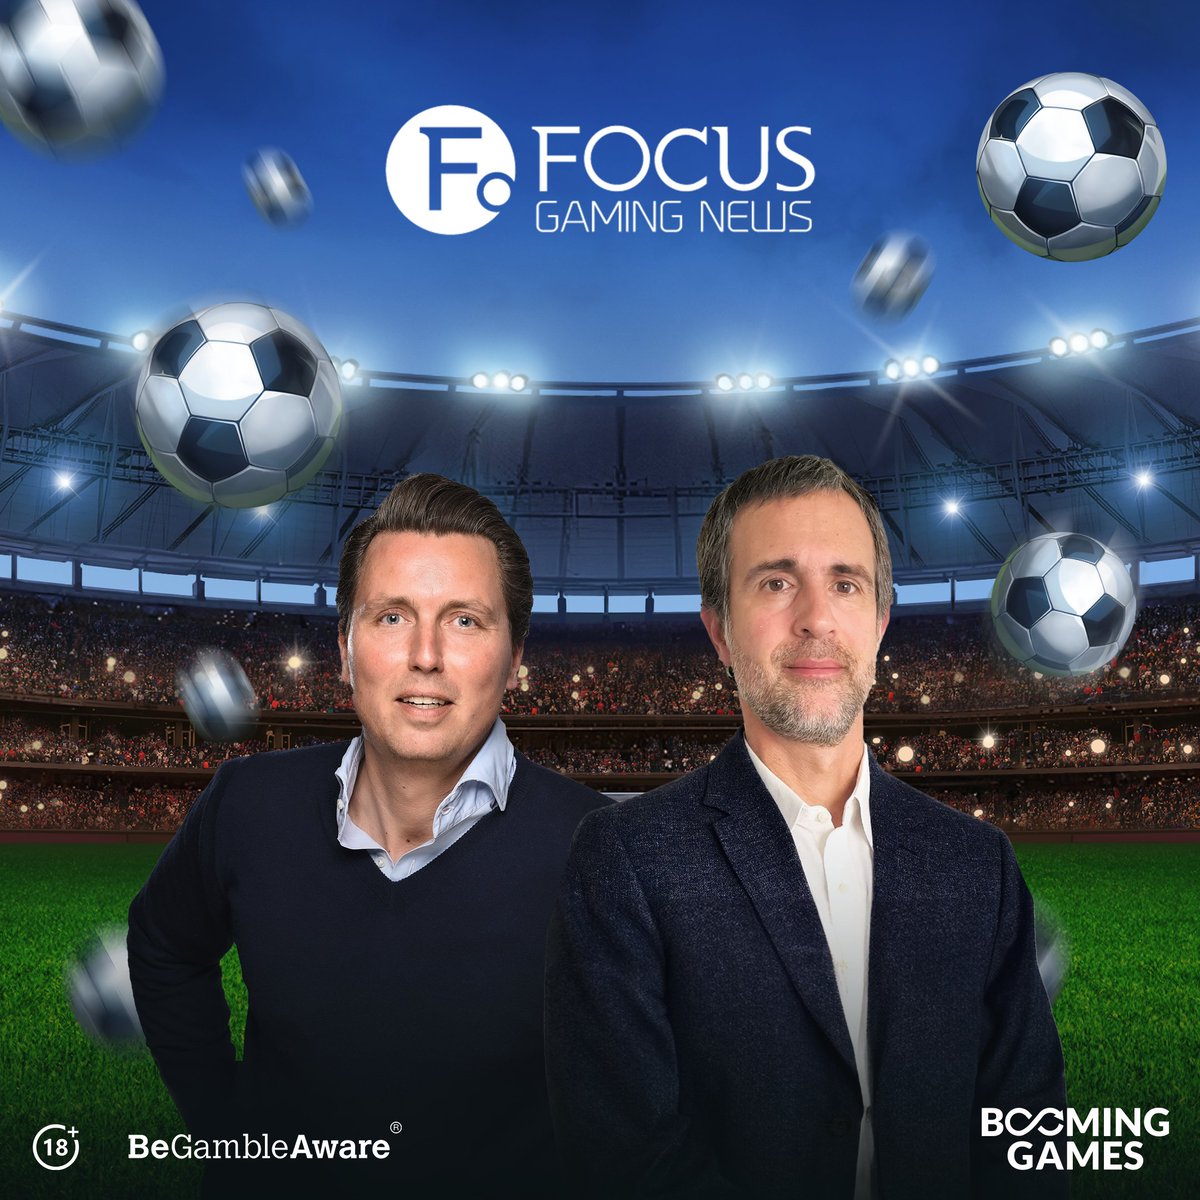 Don't miss out on this interview! At SiGMA Americas, our CEO, Max Niehusen, talked with Fernando Saffores from Focus Gaming News to discuss our upcoming releases and business strategy. Check out the conversation here: youtube.com/watch?v=NUduOj… #igaming #slots #slotonline #games